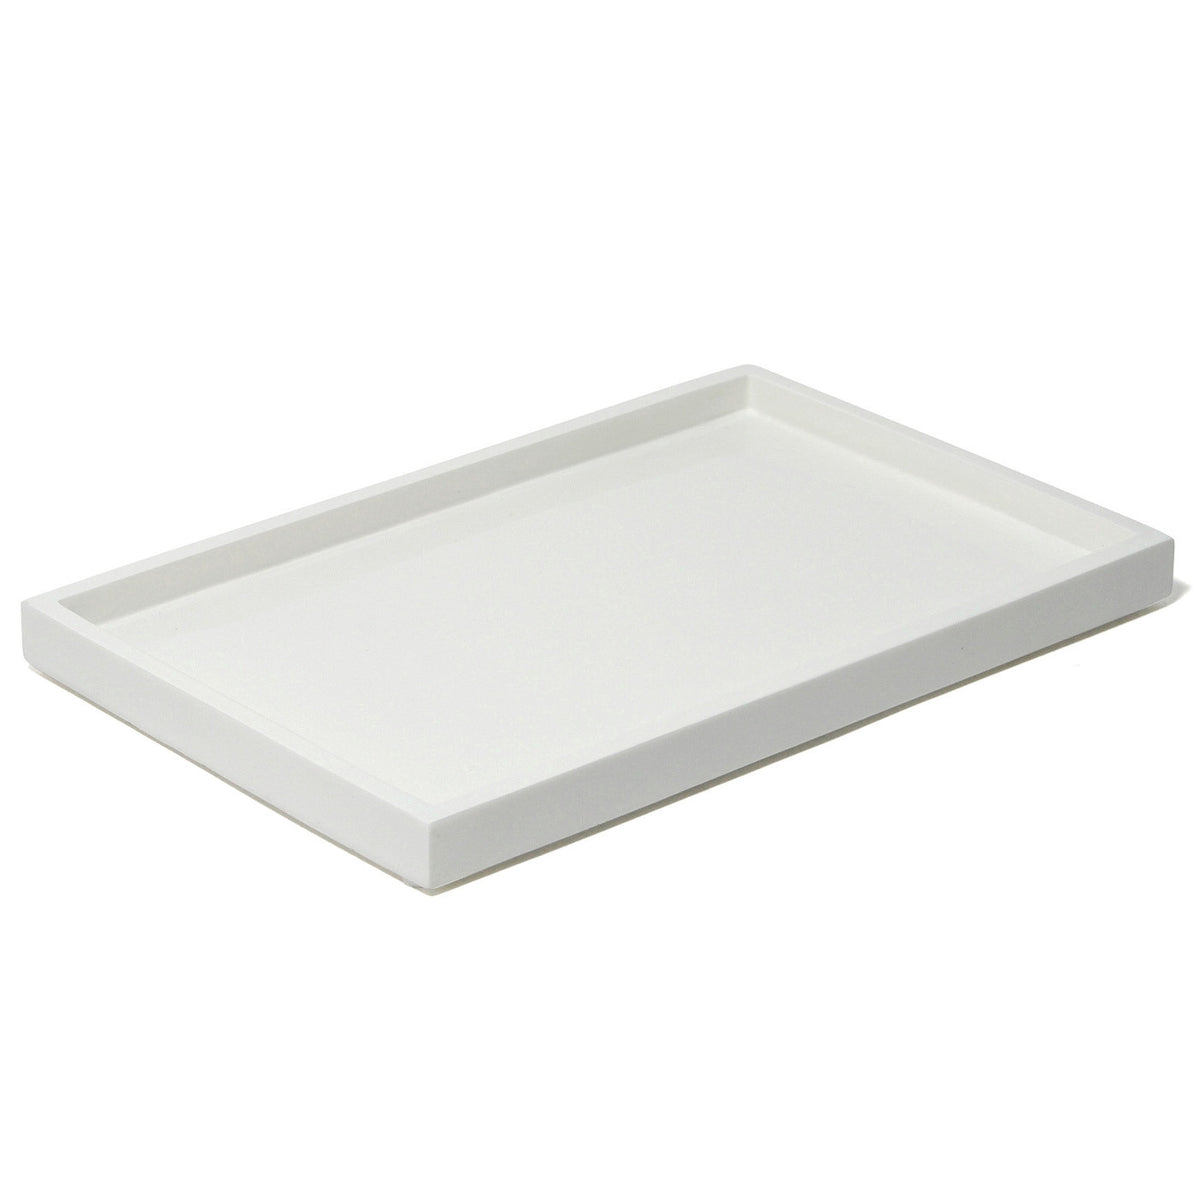 Lacquer Bath Tray by Jonathan Adler